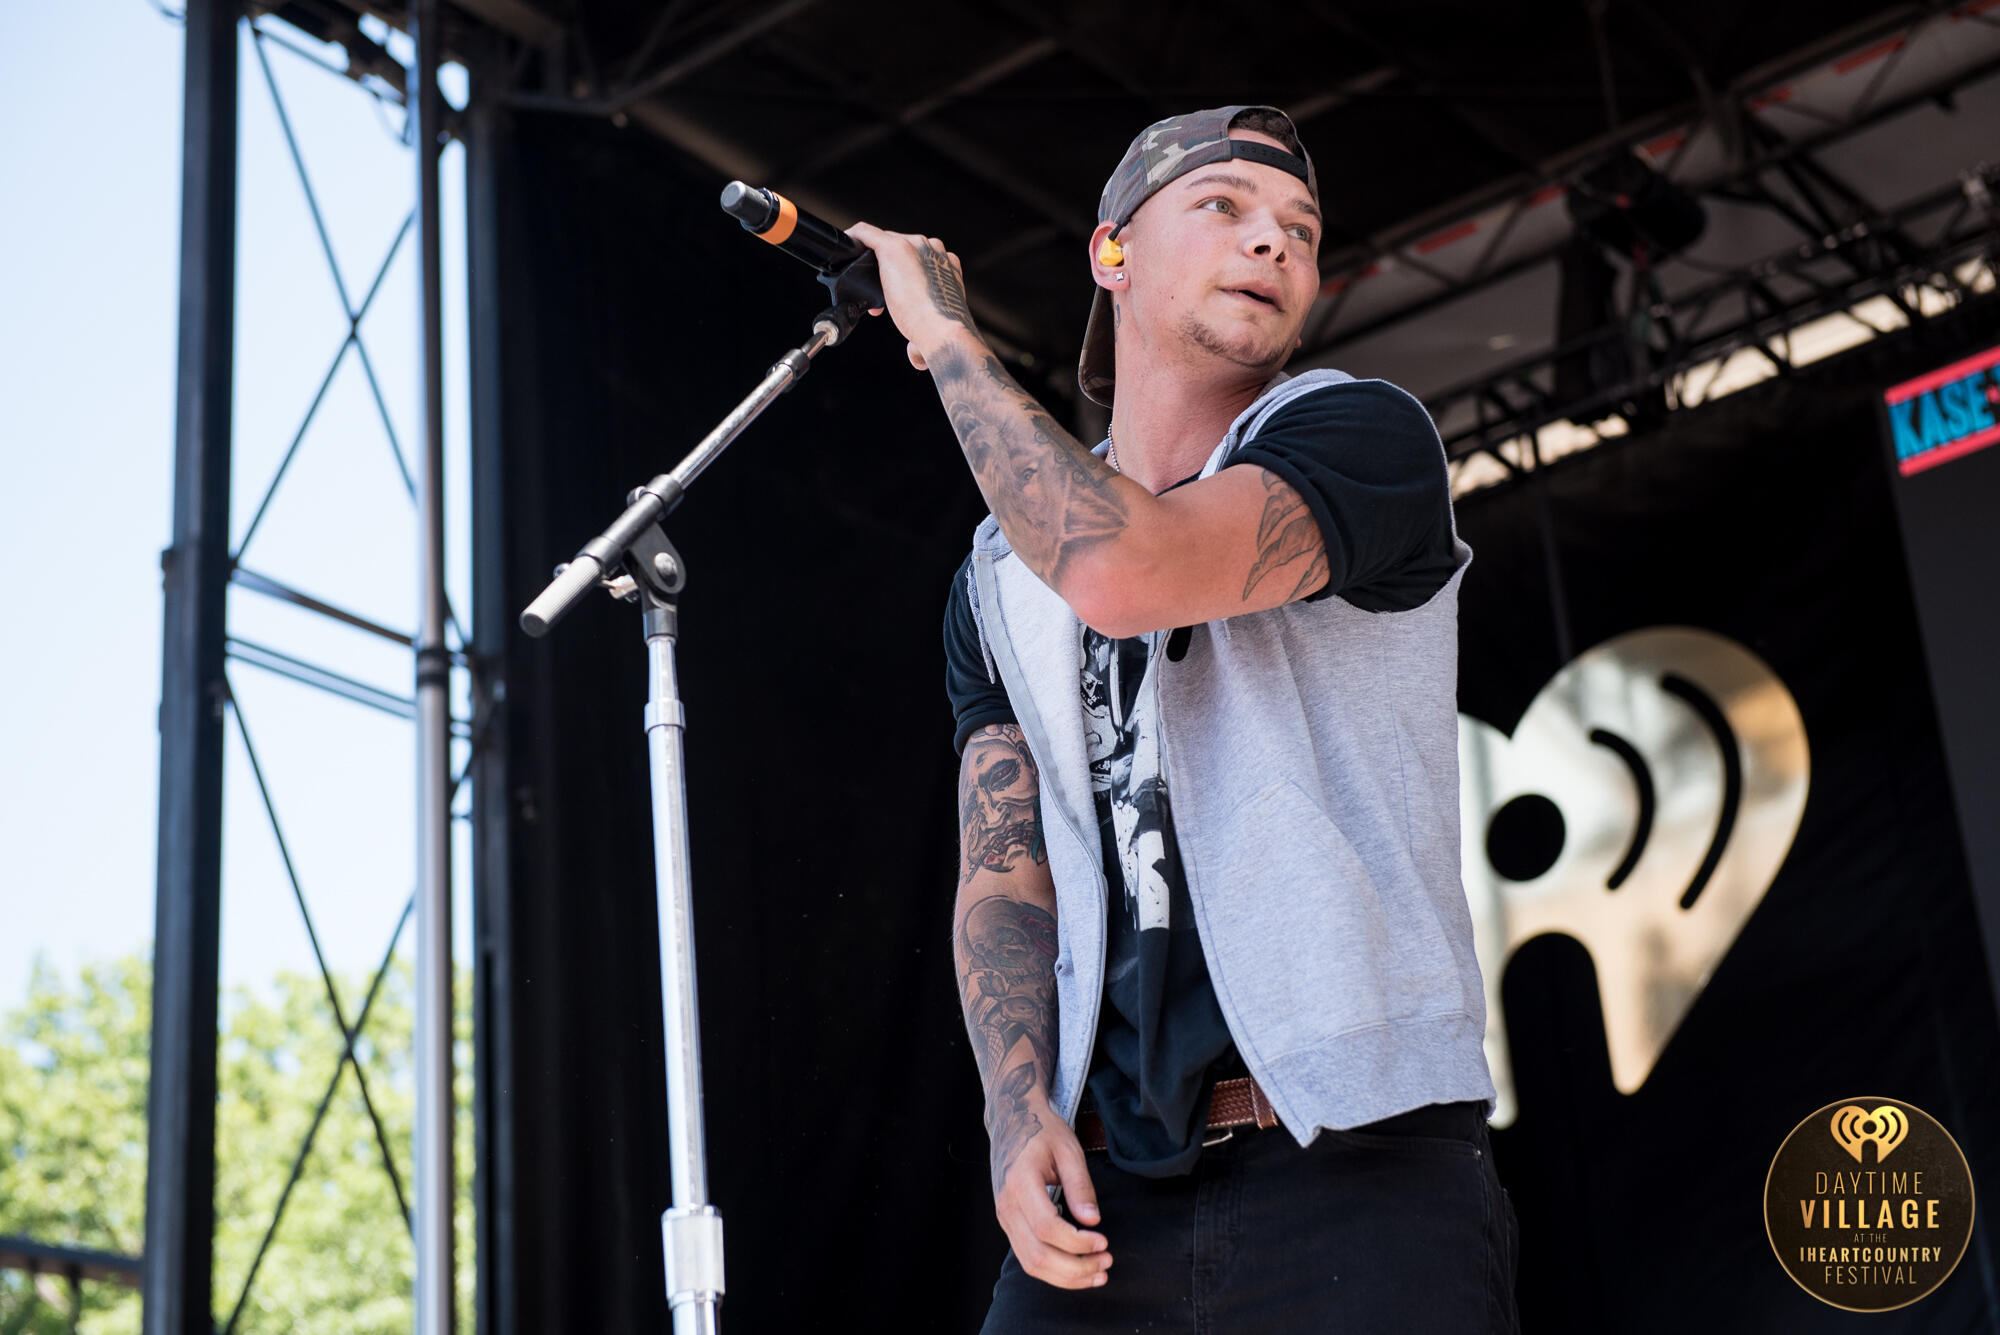 Kane Brown performs live during the 2017 Daytime Village at the iHeartCountry Festival, A Music Experience by AT&T at the Frank Erwin Center on May 6, 2017 in Austin, Texas.    <p><strong><a href=